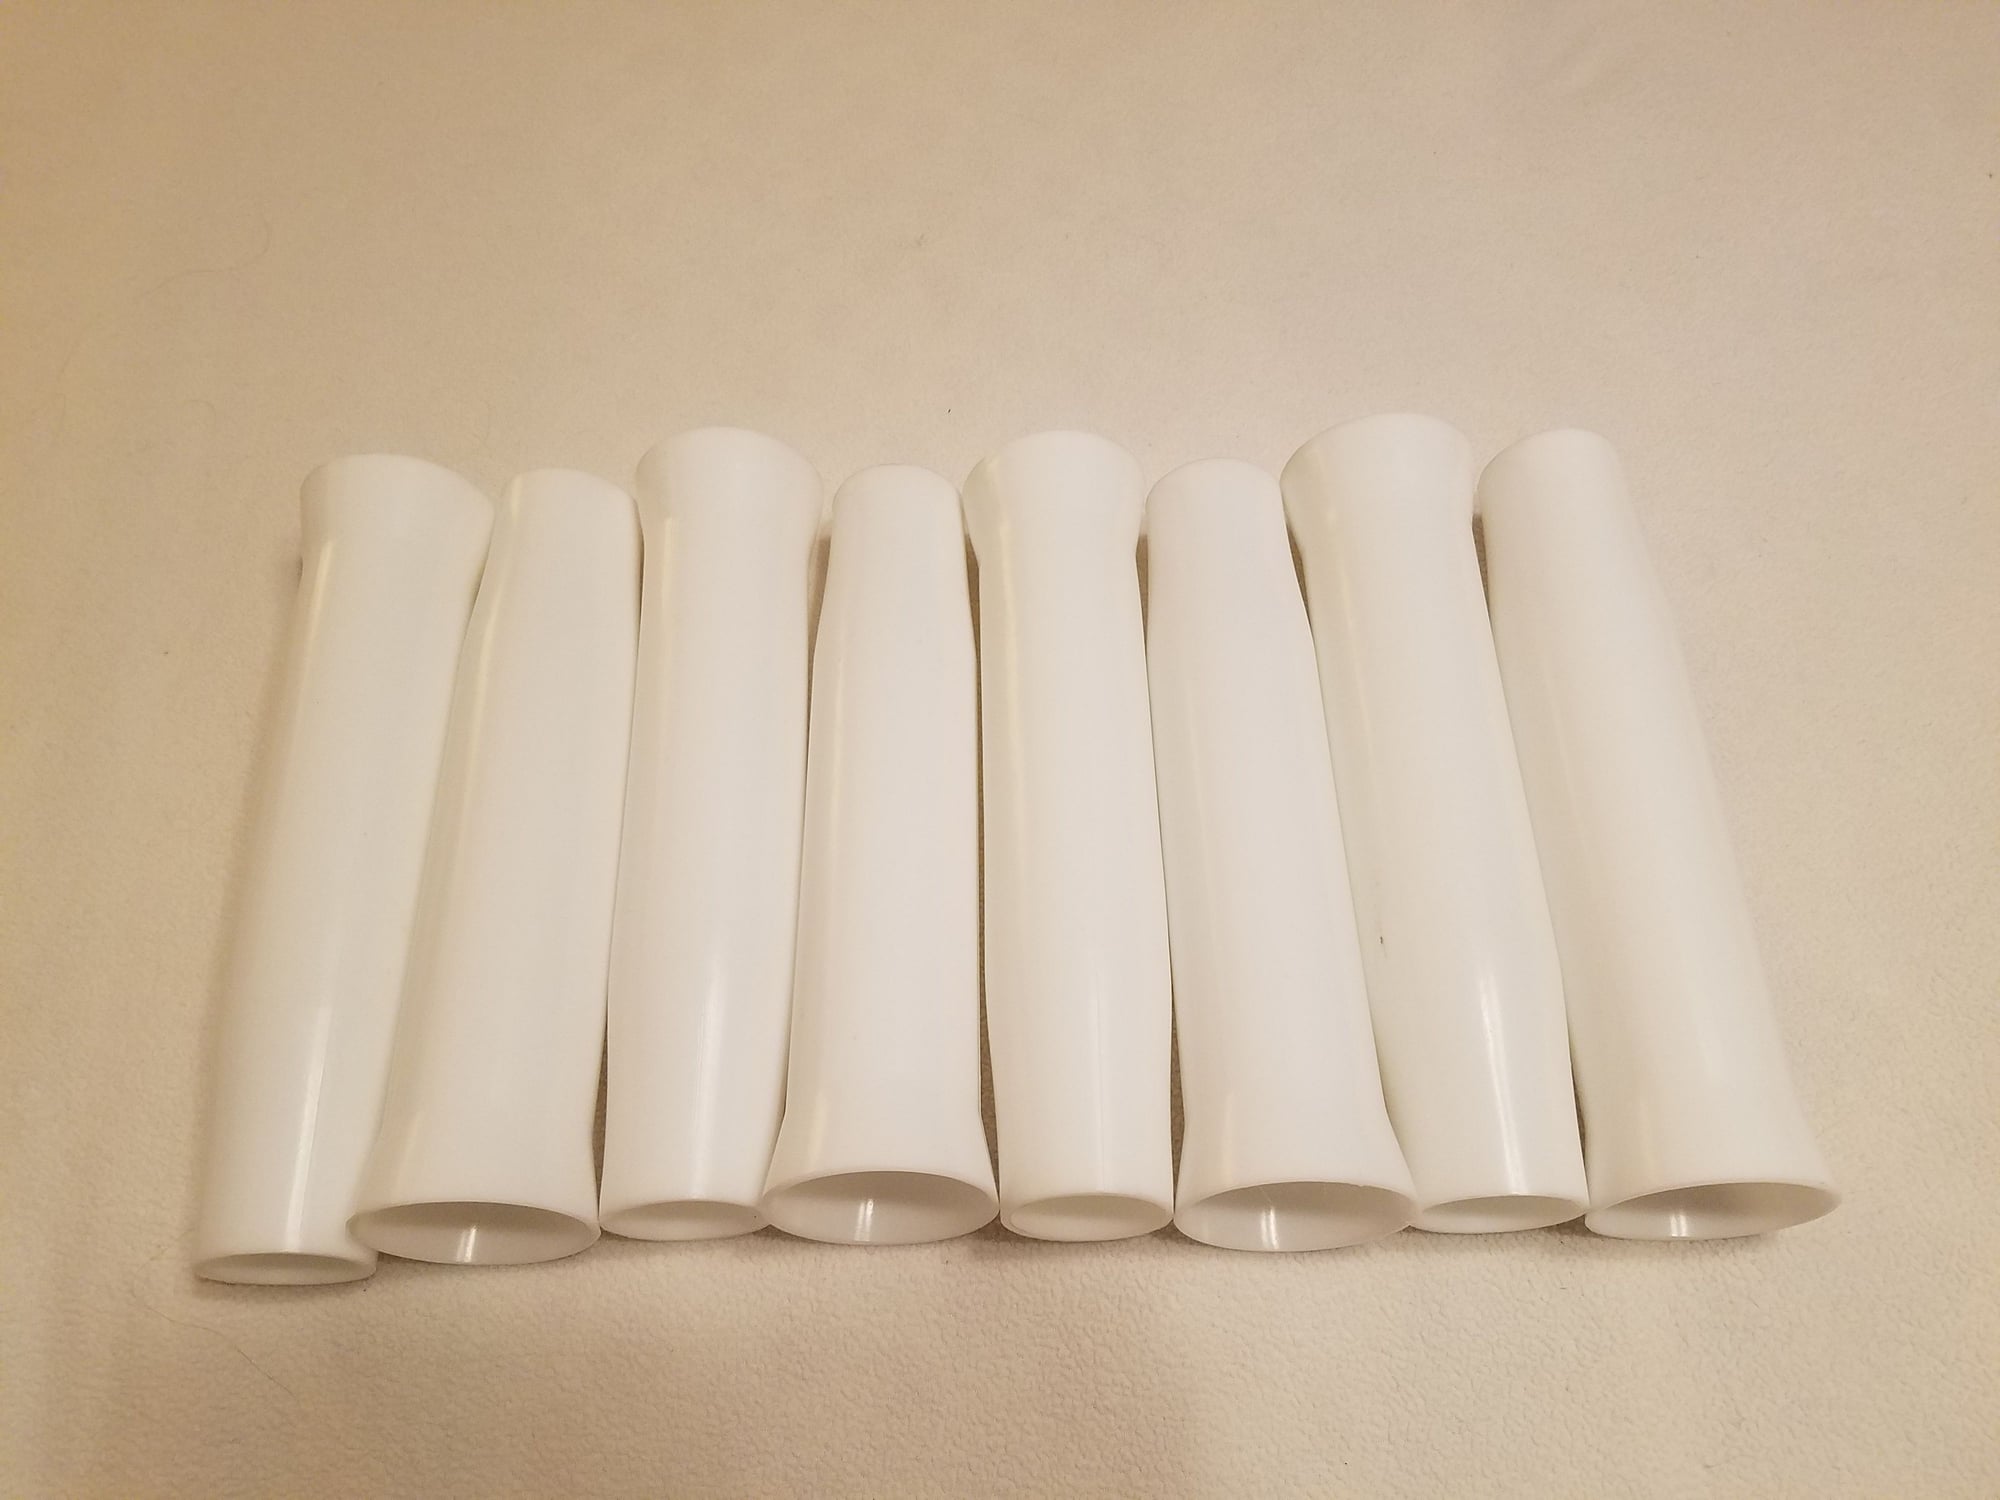 8) Rod holder inserts (white) - The Hull Truth - Boating and Fishing Forum